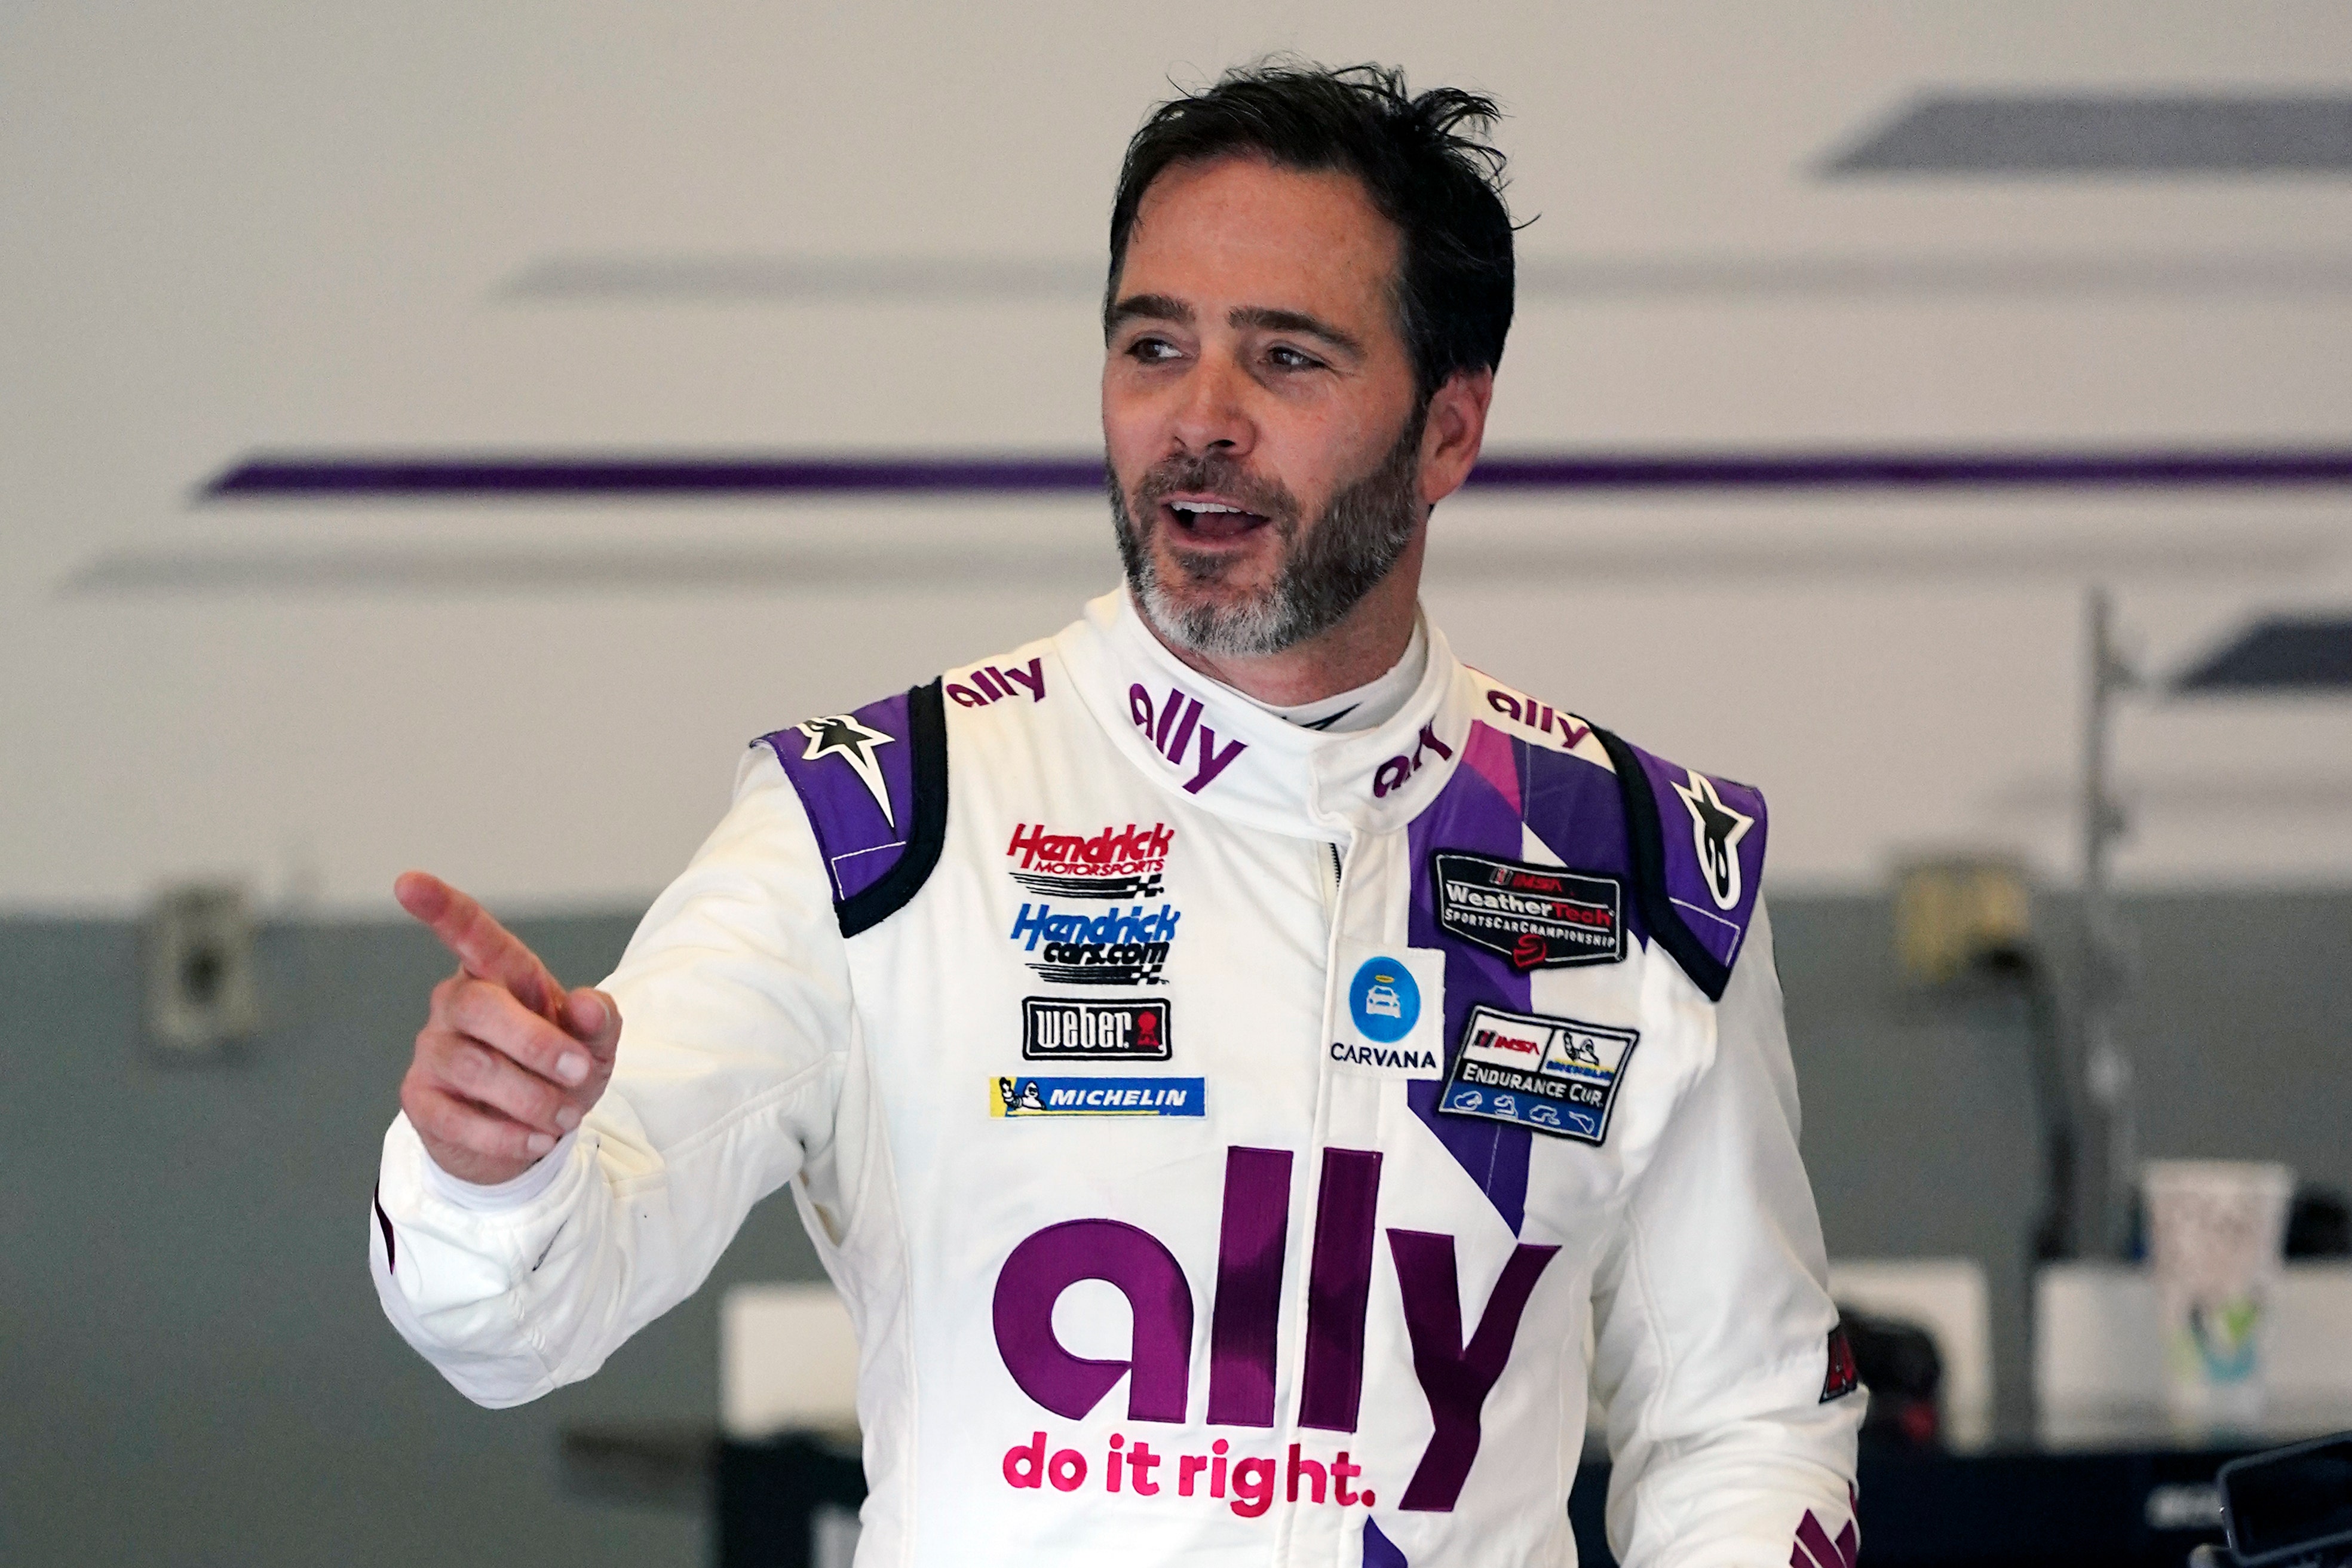 NASCAR driver Jimmie Johnson eyes IndyCar, IMSA and Le Mans for 2023 schedule